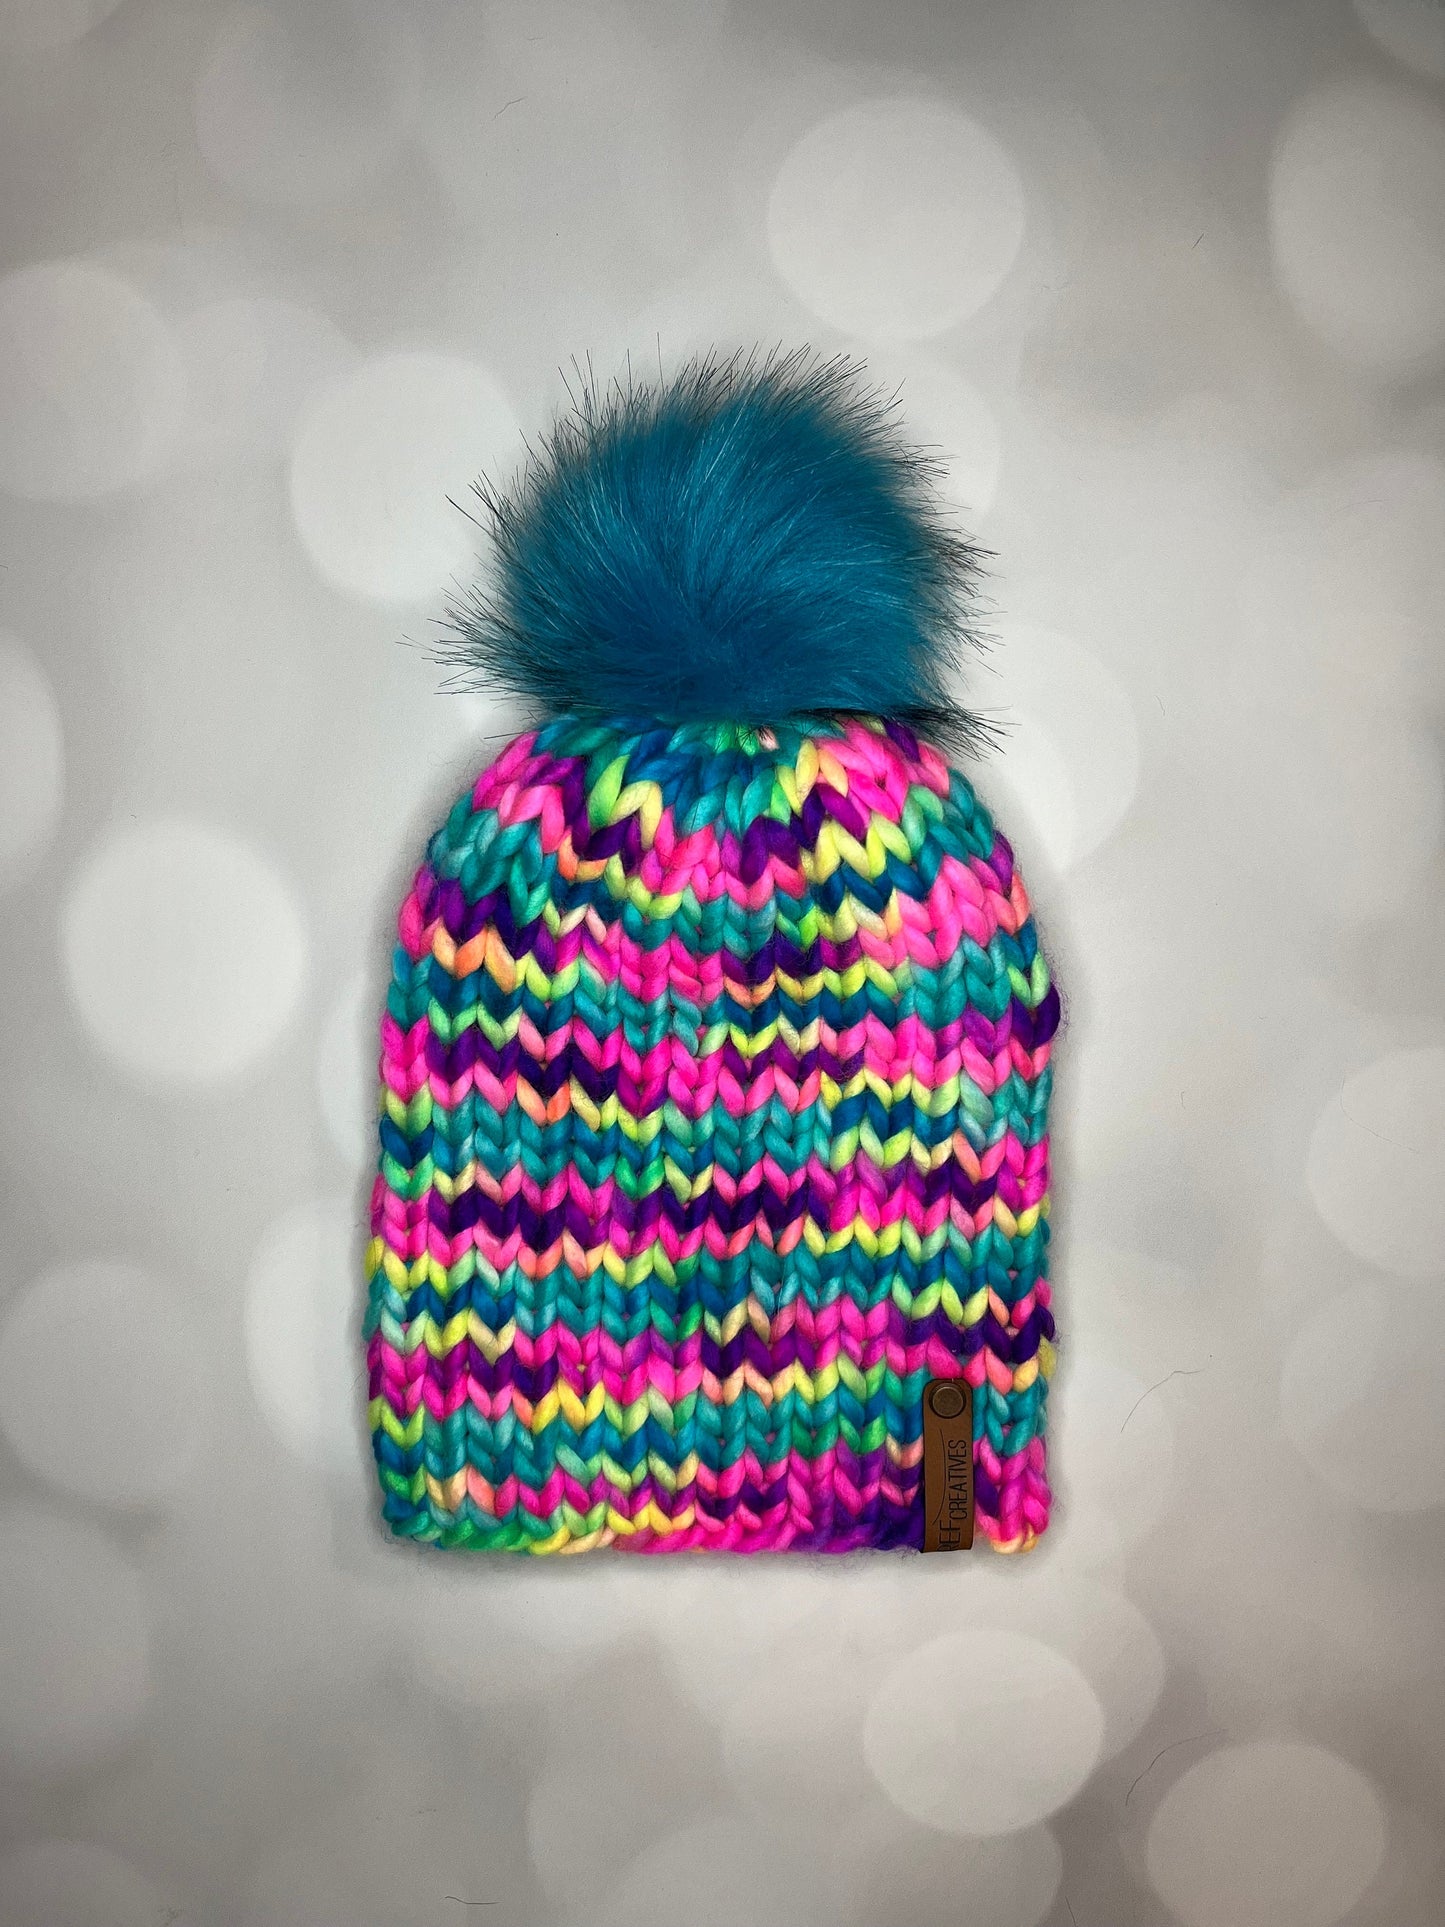 Luxury Rainbow Merino Wool Knit Hat - “90s Stickers” Beanie Hand Knit Hat with Hand Dyed Yarn